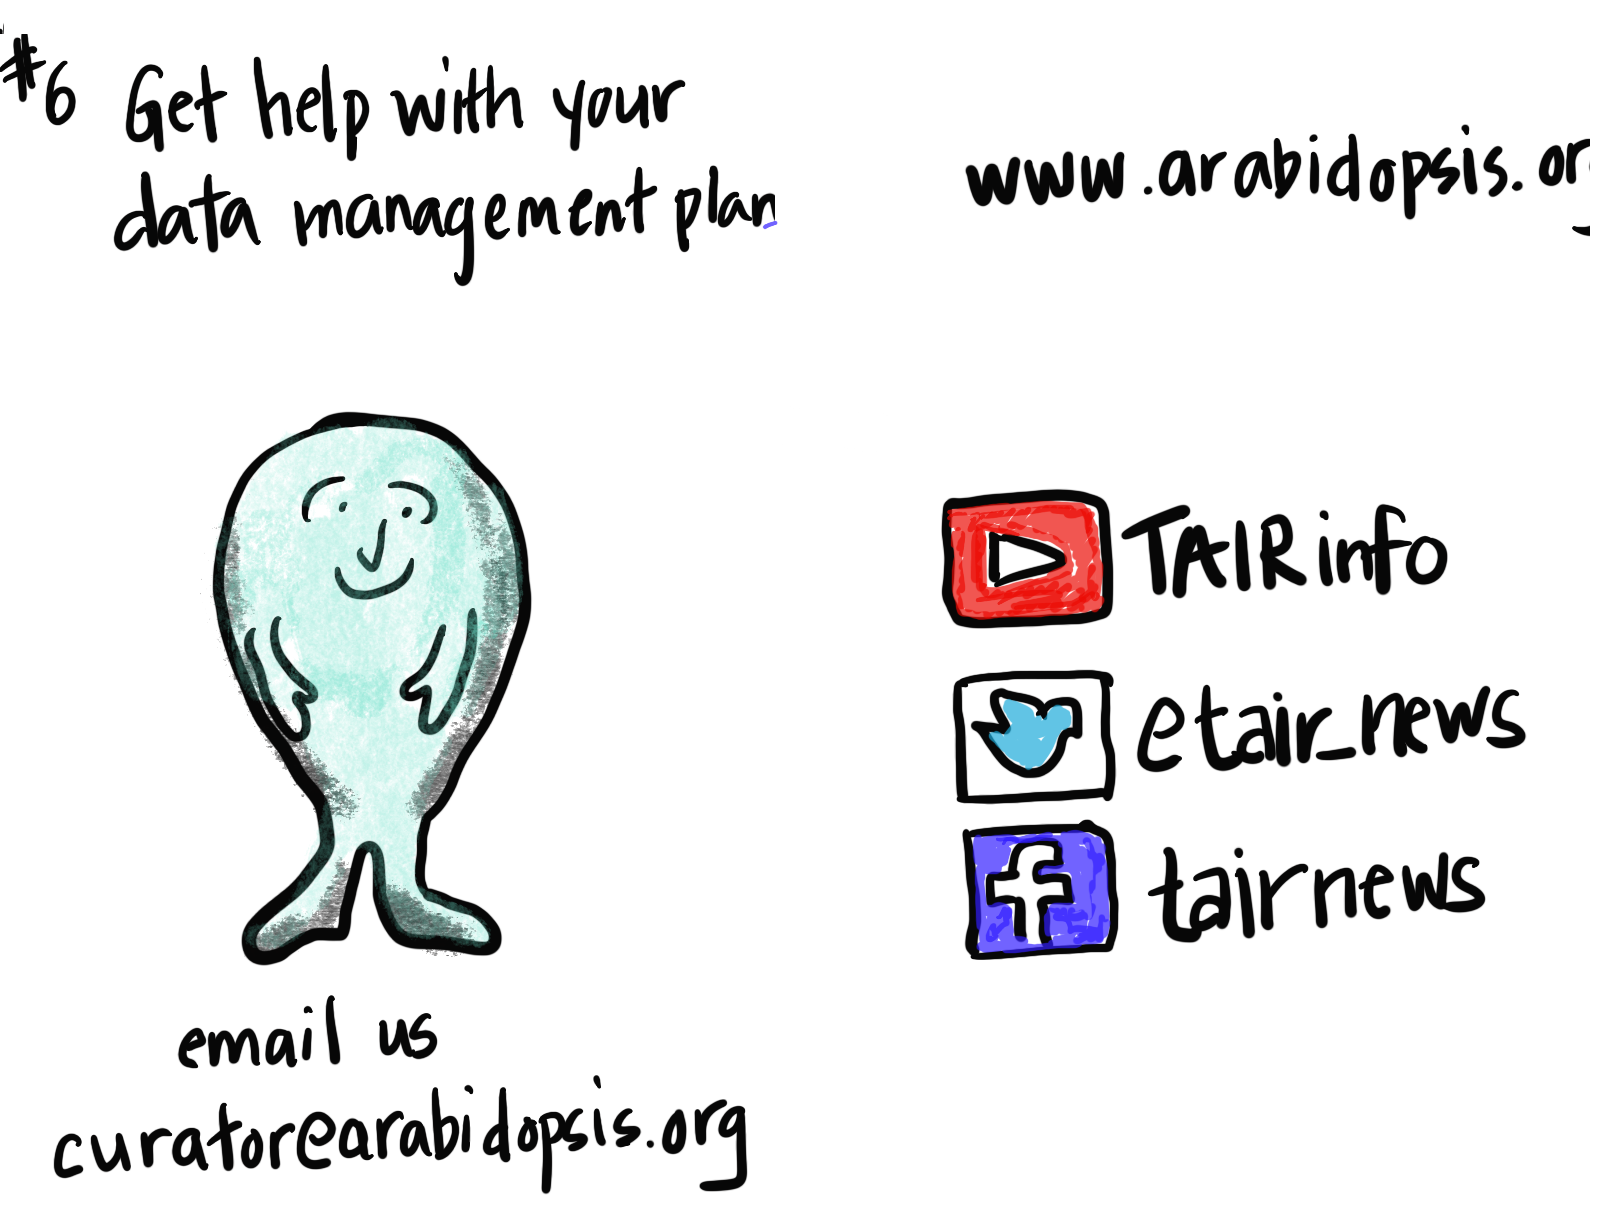 Seventh page of zine is titled with #6 Get help with your data management plan. Email curator@arabidopsis.orgEight Page of zine has the social media links including  website www.arabidopsis.org , youtube is TAIRinfo, twitter is etair_news, and facebook is tairnews.